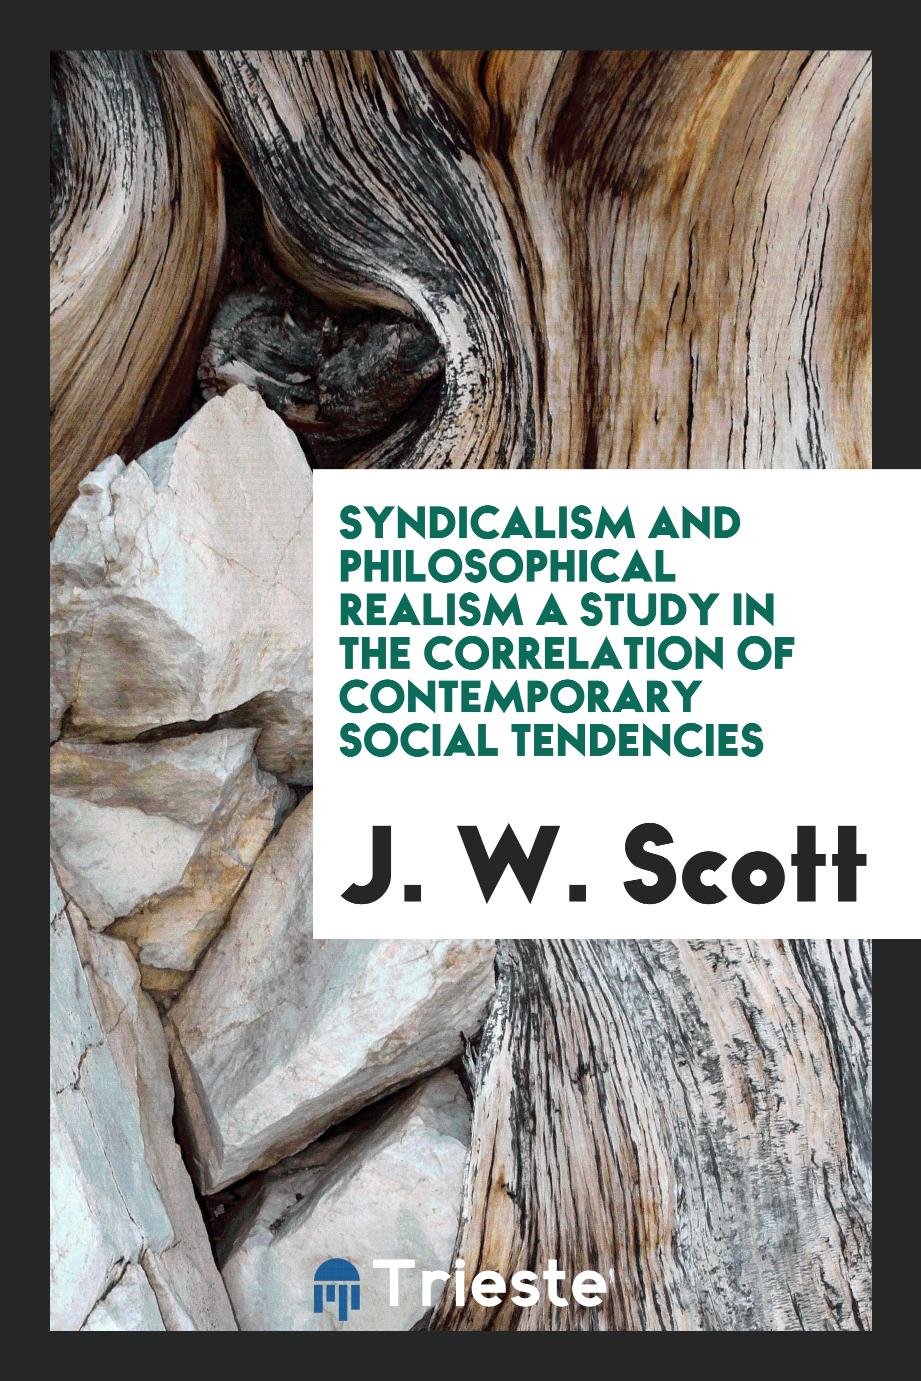 Syndicalism and philosophical realism a study in the correlation of contemporary social tendencies